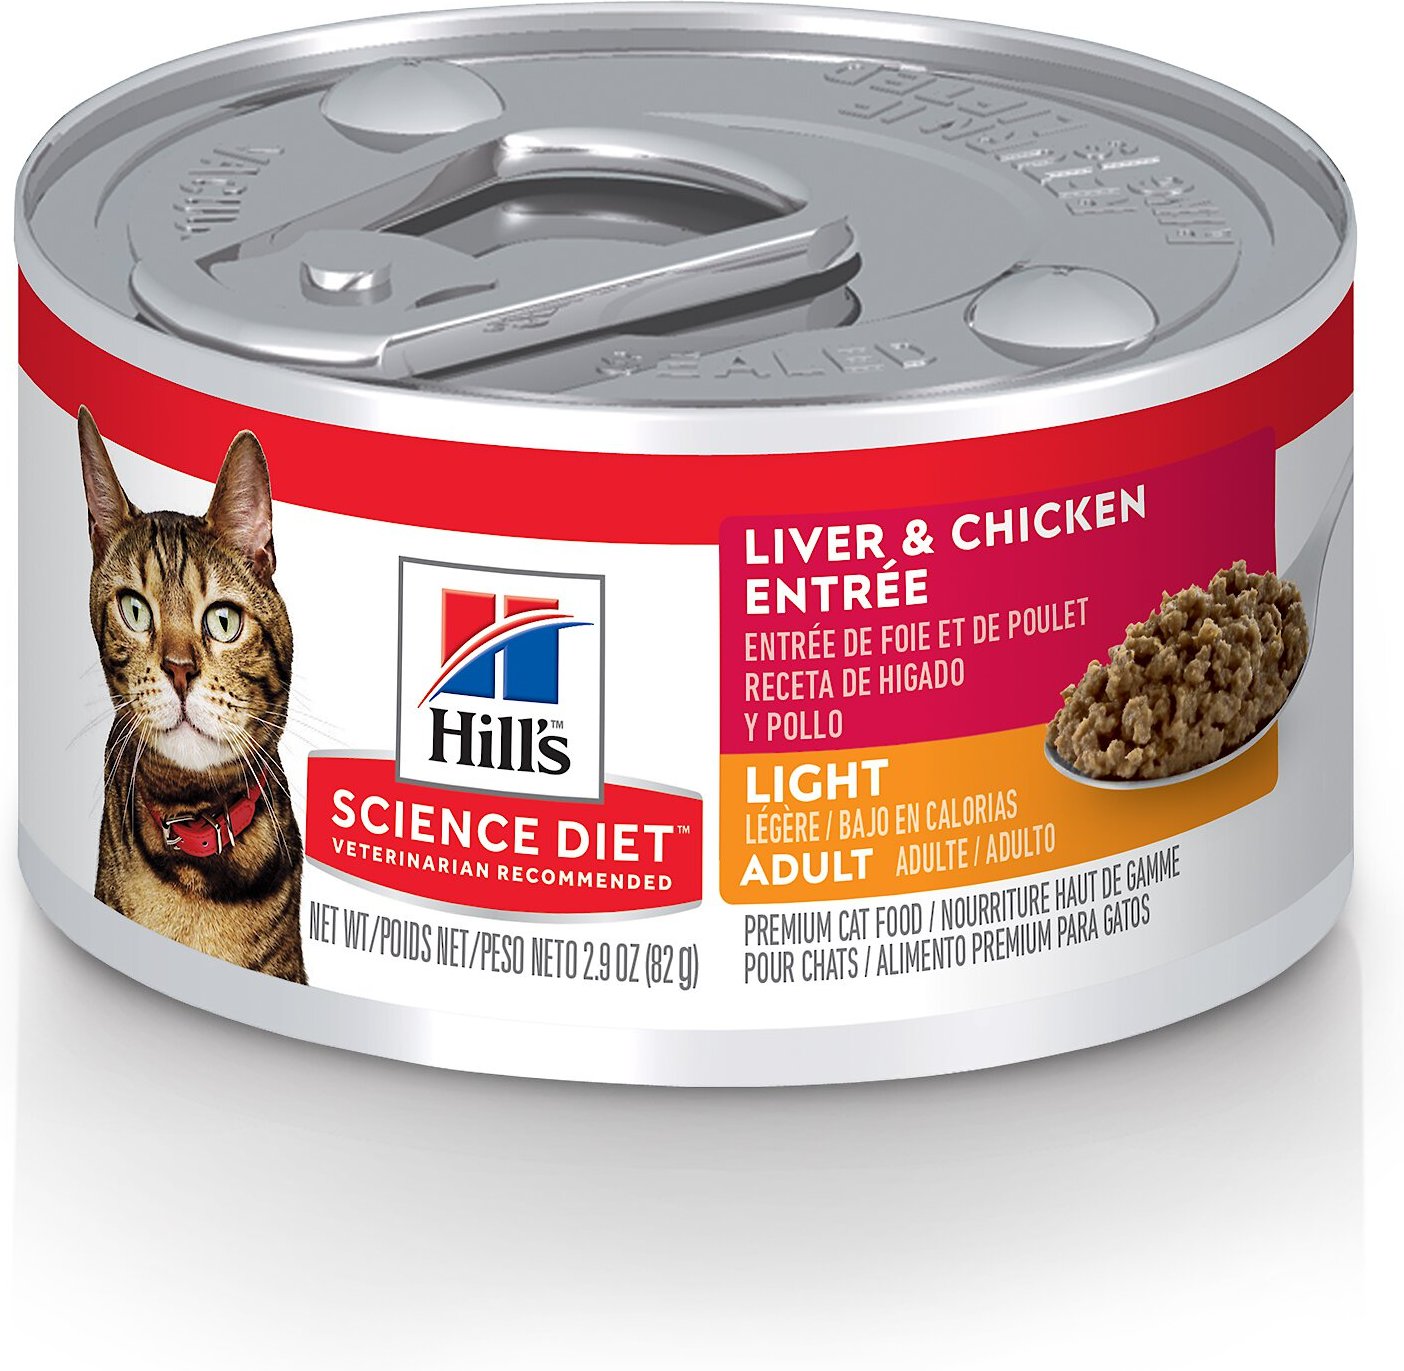 HILL'S SCIENCE DIET Adult Light Liver & Chicken Entree Canned Cat Food